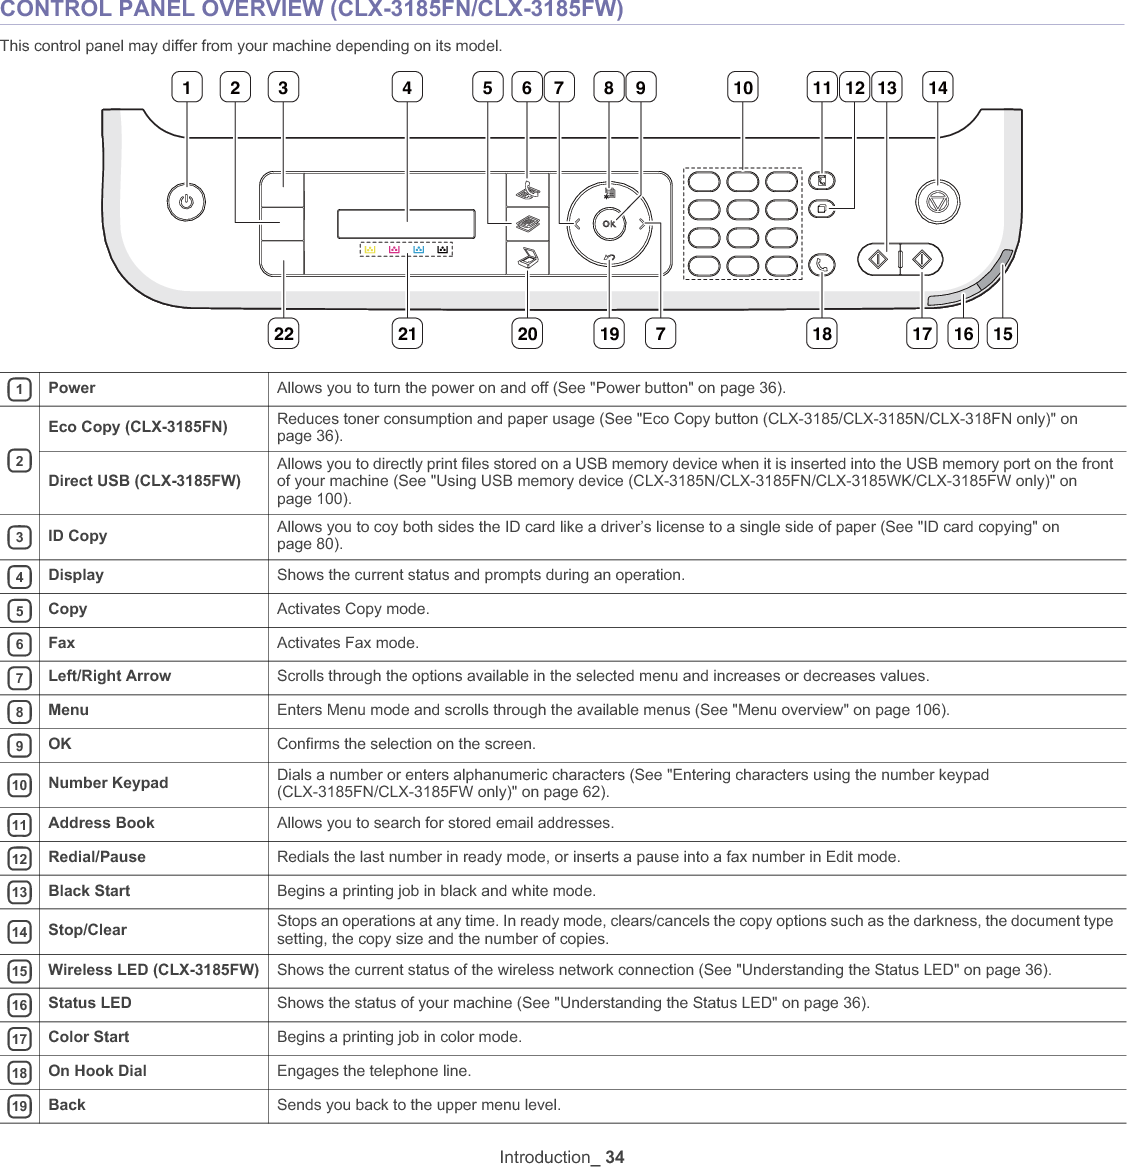 Introduction_ 34CONTROL PANEL OVERVIEW (CLX-3185FN/CLX-3185FW)This control panel may differ from your machine depending on its model.1Power Allows you to turn the power on and off (See &quot;Power button&quot; on page 36).2Eco Copy (CLX-3185FN) Reduces toner consumption and paper usage (See &quot;Eco Copy button (CLX-3185/CLX-3185N/CLX-318FN only)&quot; on page 36).Direct USB (CLX-3185FW)Allows you to directly print files stored on a USB memory device when it is inserted into the USB memory port on the front of your machine (See &quot;Using USB memory device (CLX-3185N/CLX-3185FN/CLX-3185WK/CLX-3185FW only)&quot; on page 100).3ID Copy Allows you to coy both sides the ID card like a driver’s license to a single side of paper (See &quot;ID card copying&quot; on page 80).4Display Shows the current status and prompts during an operation.5Copy Activates Copy mode.6Fax Activates Fax mode.7Left/Right Arrow Scrolls through the options available in the selected menu and increases or decreases values.8Menu Enters Menu mode and scrolls through the available menus (See &quot;Menu overview&quot; on page 106).9OK Confirms the selection on the screen.10 Number Keypad Dials a number or enters alphanumeric characters (See &quot;Entering characters using the number keypad (CLX-3185FN/CLX-3185FW only)&quot; on page 62).11 Address Book Allows you to search for stored email addresses.12 Redial/Pause Redials the last number in ready mode, or inserts a pause into a fax number in Edit mode.13 Black Start Begins a printing job in black and white mode.14 Stop/Clear Stops an operations at any time. In ready mode, clears/cancels the copy options such as the darkness, the document type setting, the copy size and the number of copies.15 Wireless LED (CLX-3185FW) Shows the current status of the wireless network connection (See &quot;Understanding the Status LED&quot; on page 36).16 Status LED Shows the status of your machine (See &quot;Understanding the Status LED&quot; on page 36).17 Color Start Begins a printing job in color mode.18 On Hook Dial Engages the telephone line.19 Back Sends you back to the upper menu level.15161718192122 20 71 3 4 6 8 1110 13 145 7 1292